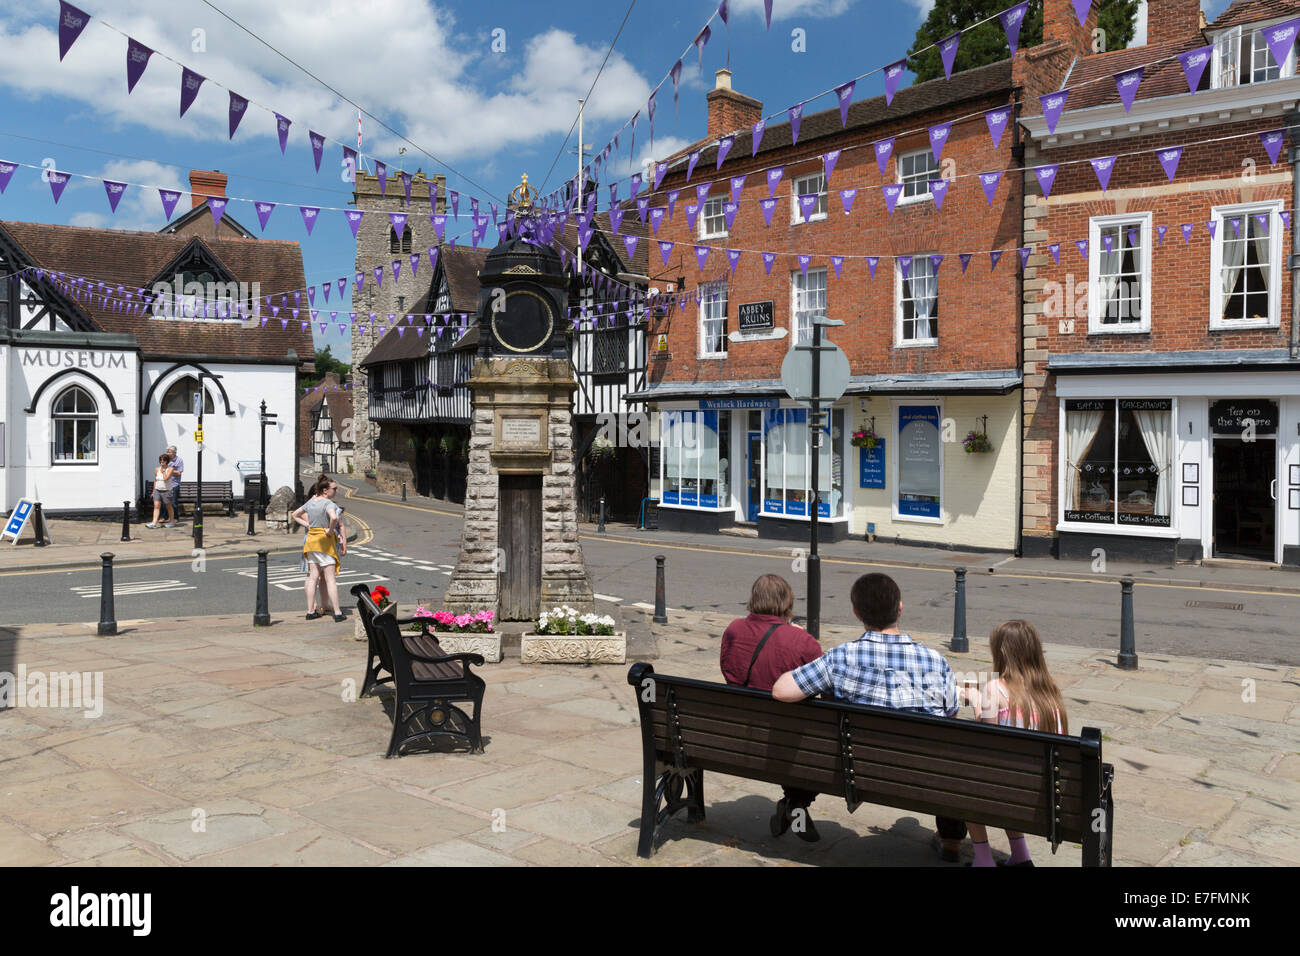 The Square and Jubilee Clock, Much Wenlock, Shropshire, England, United Kingdom, Europe Stock Photo